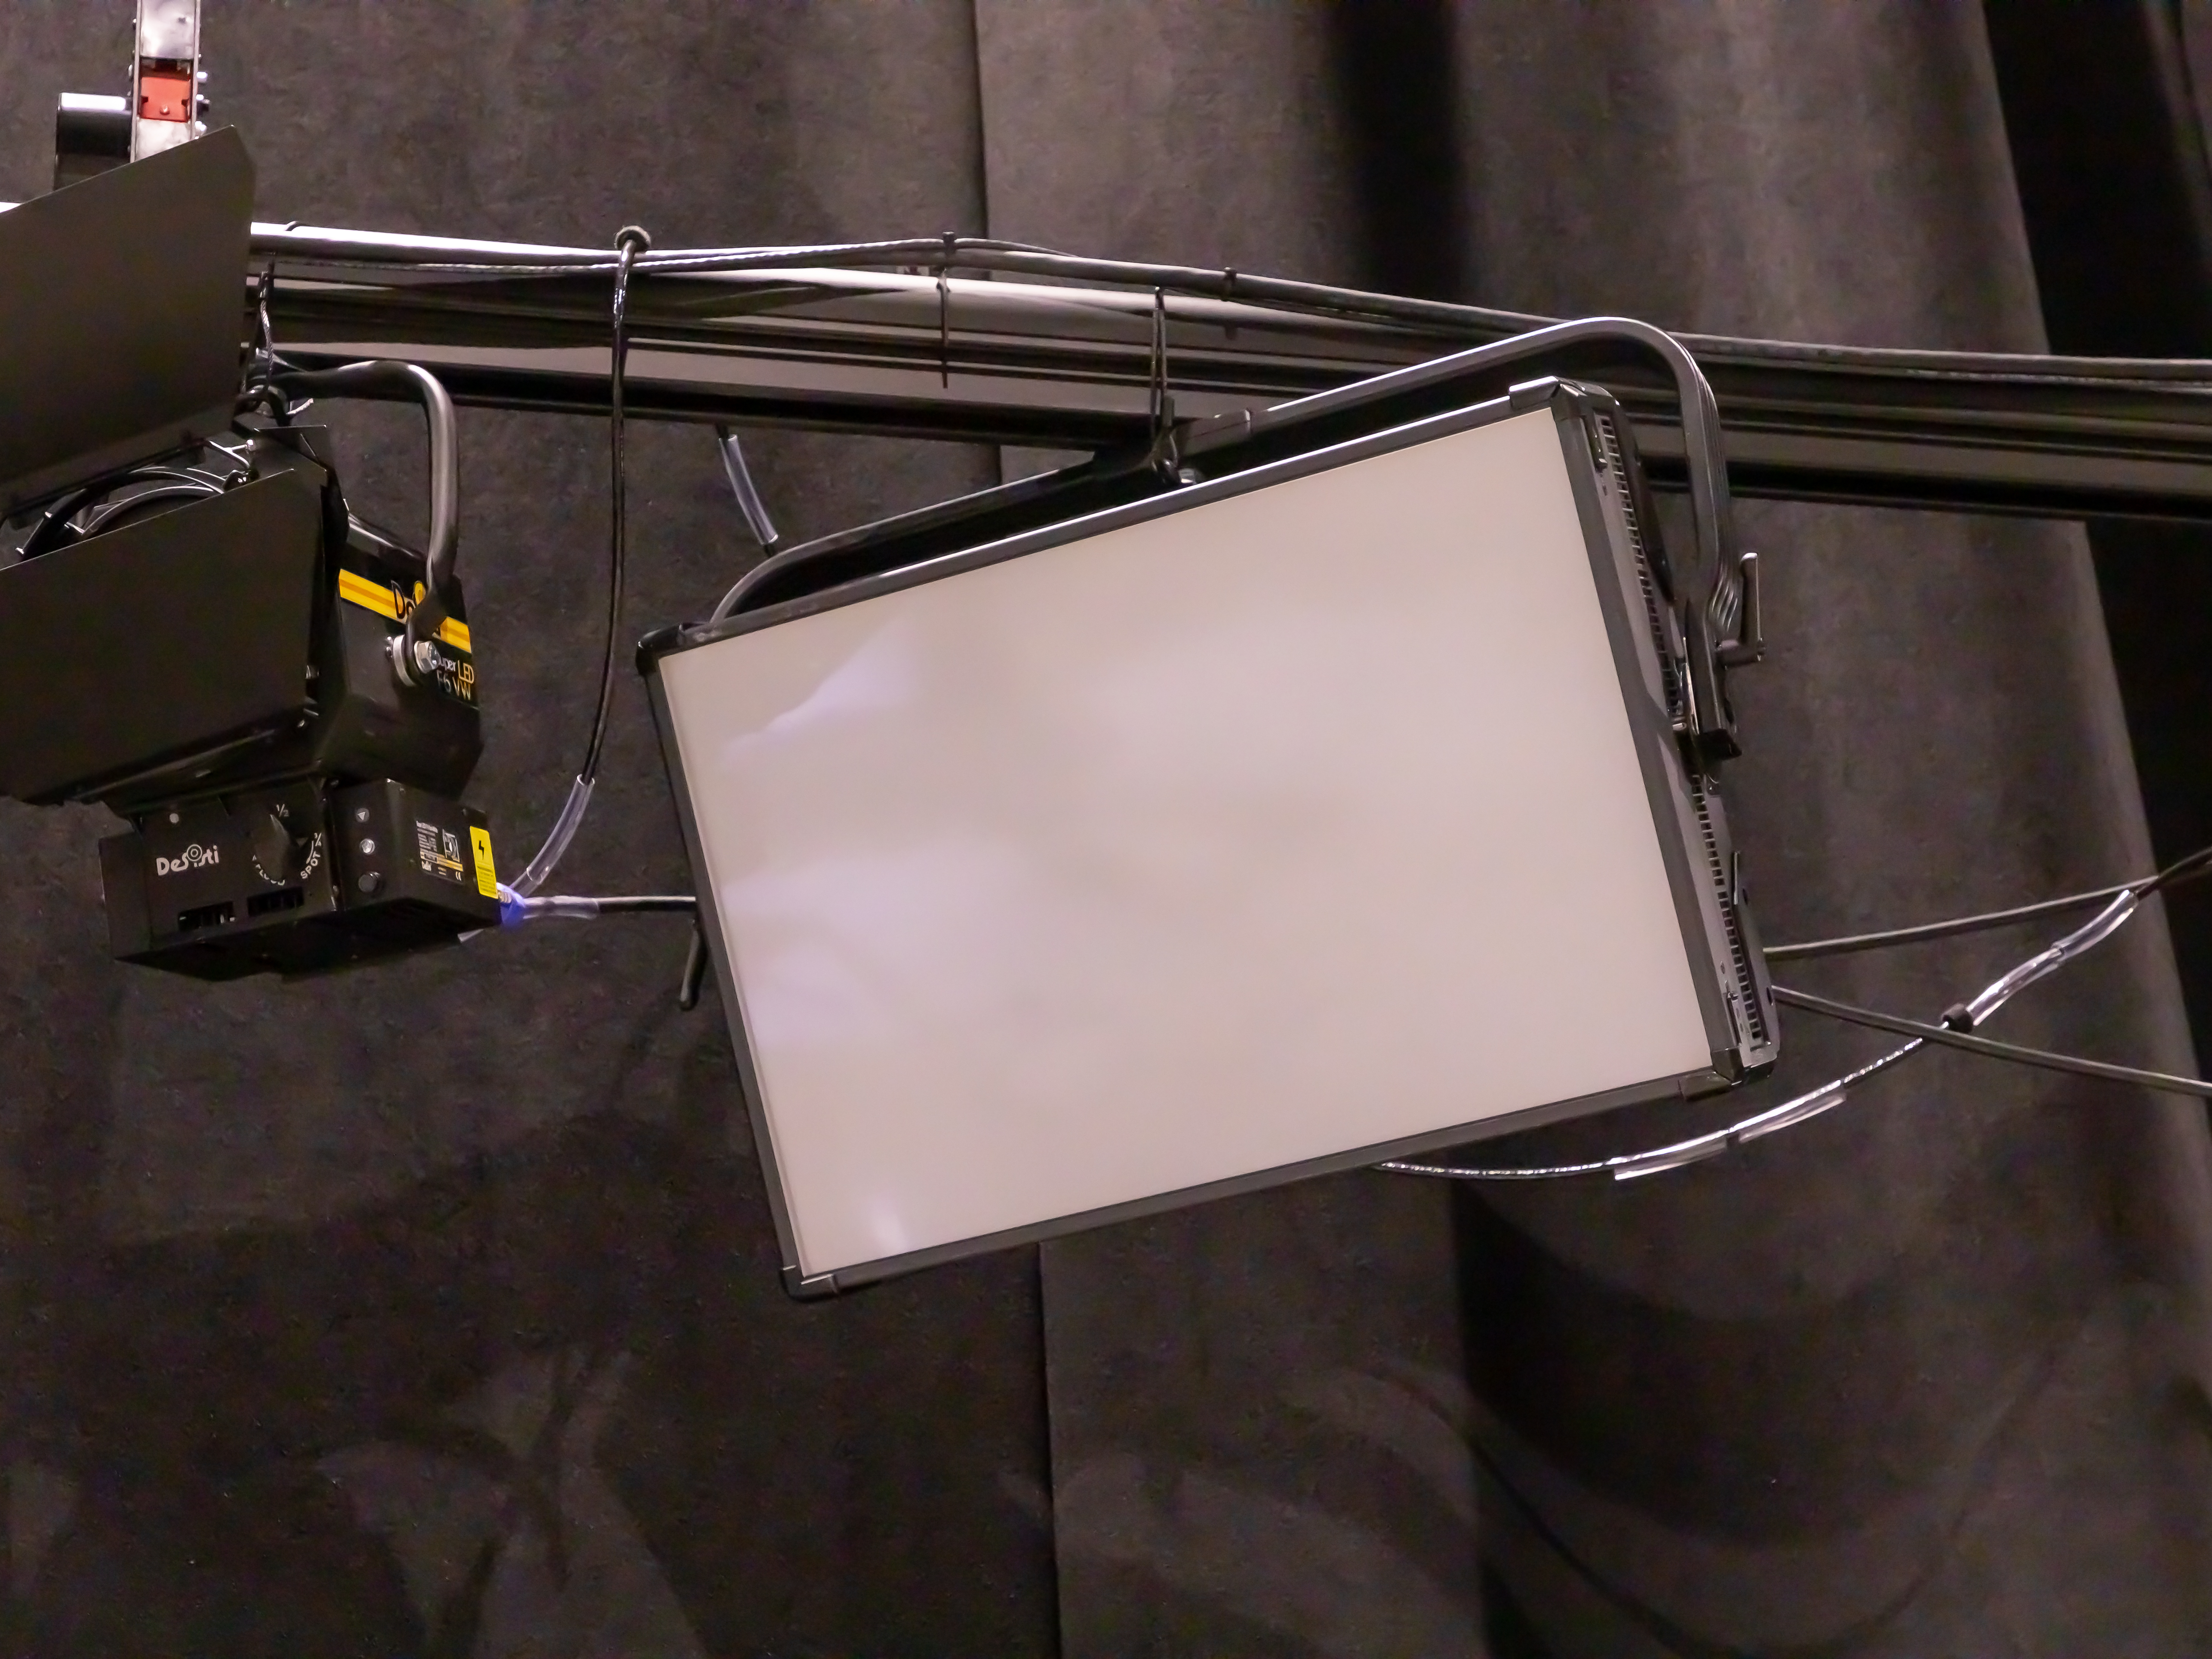 A panel light hanging from a baton. It is rectangular with a white frosted covering.